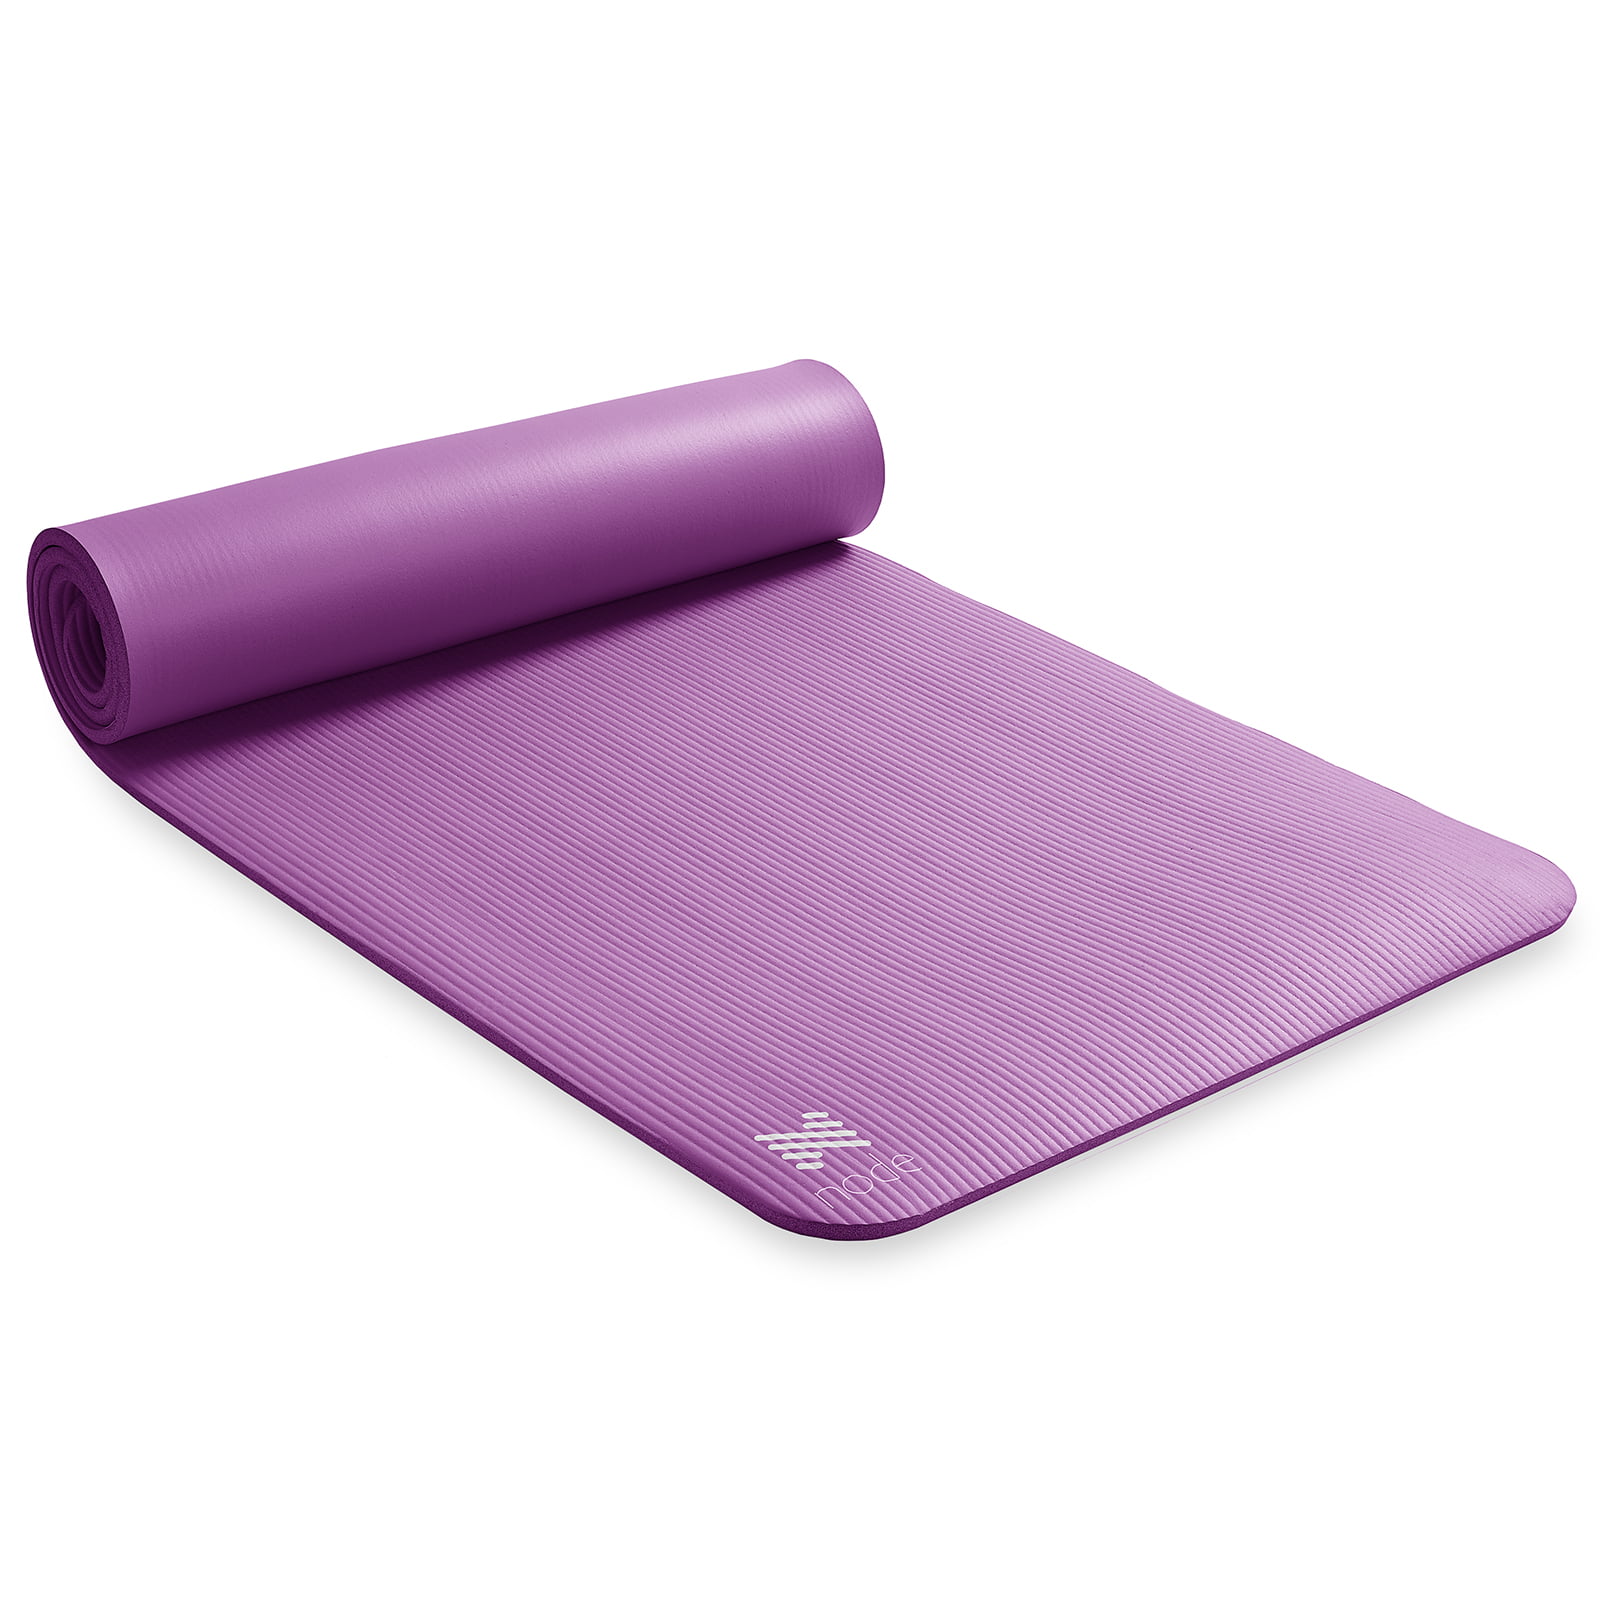 1/2 Extra Thick with Carrying Strap Node Fitness 72 x 24 Yoga Mat 